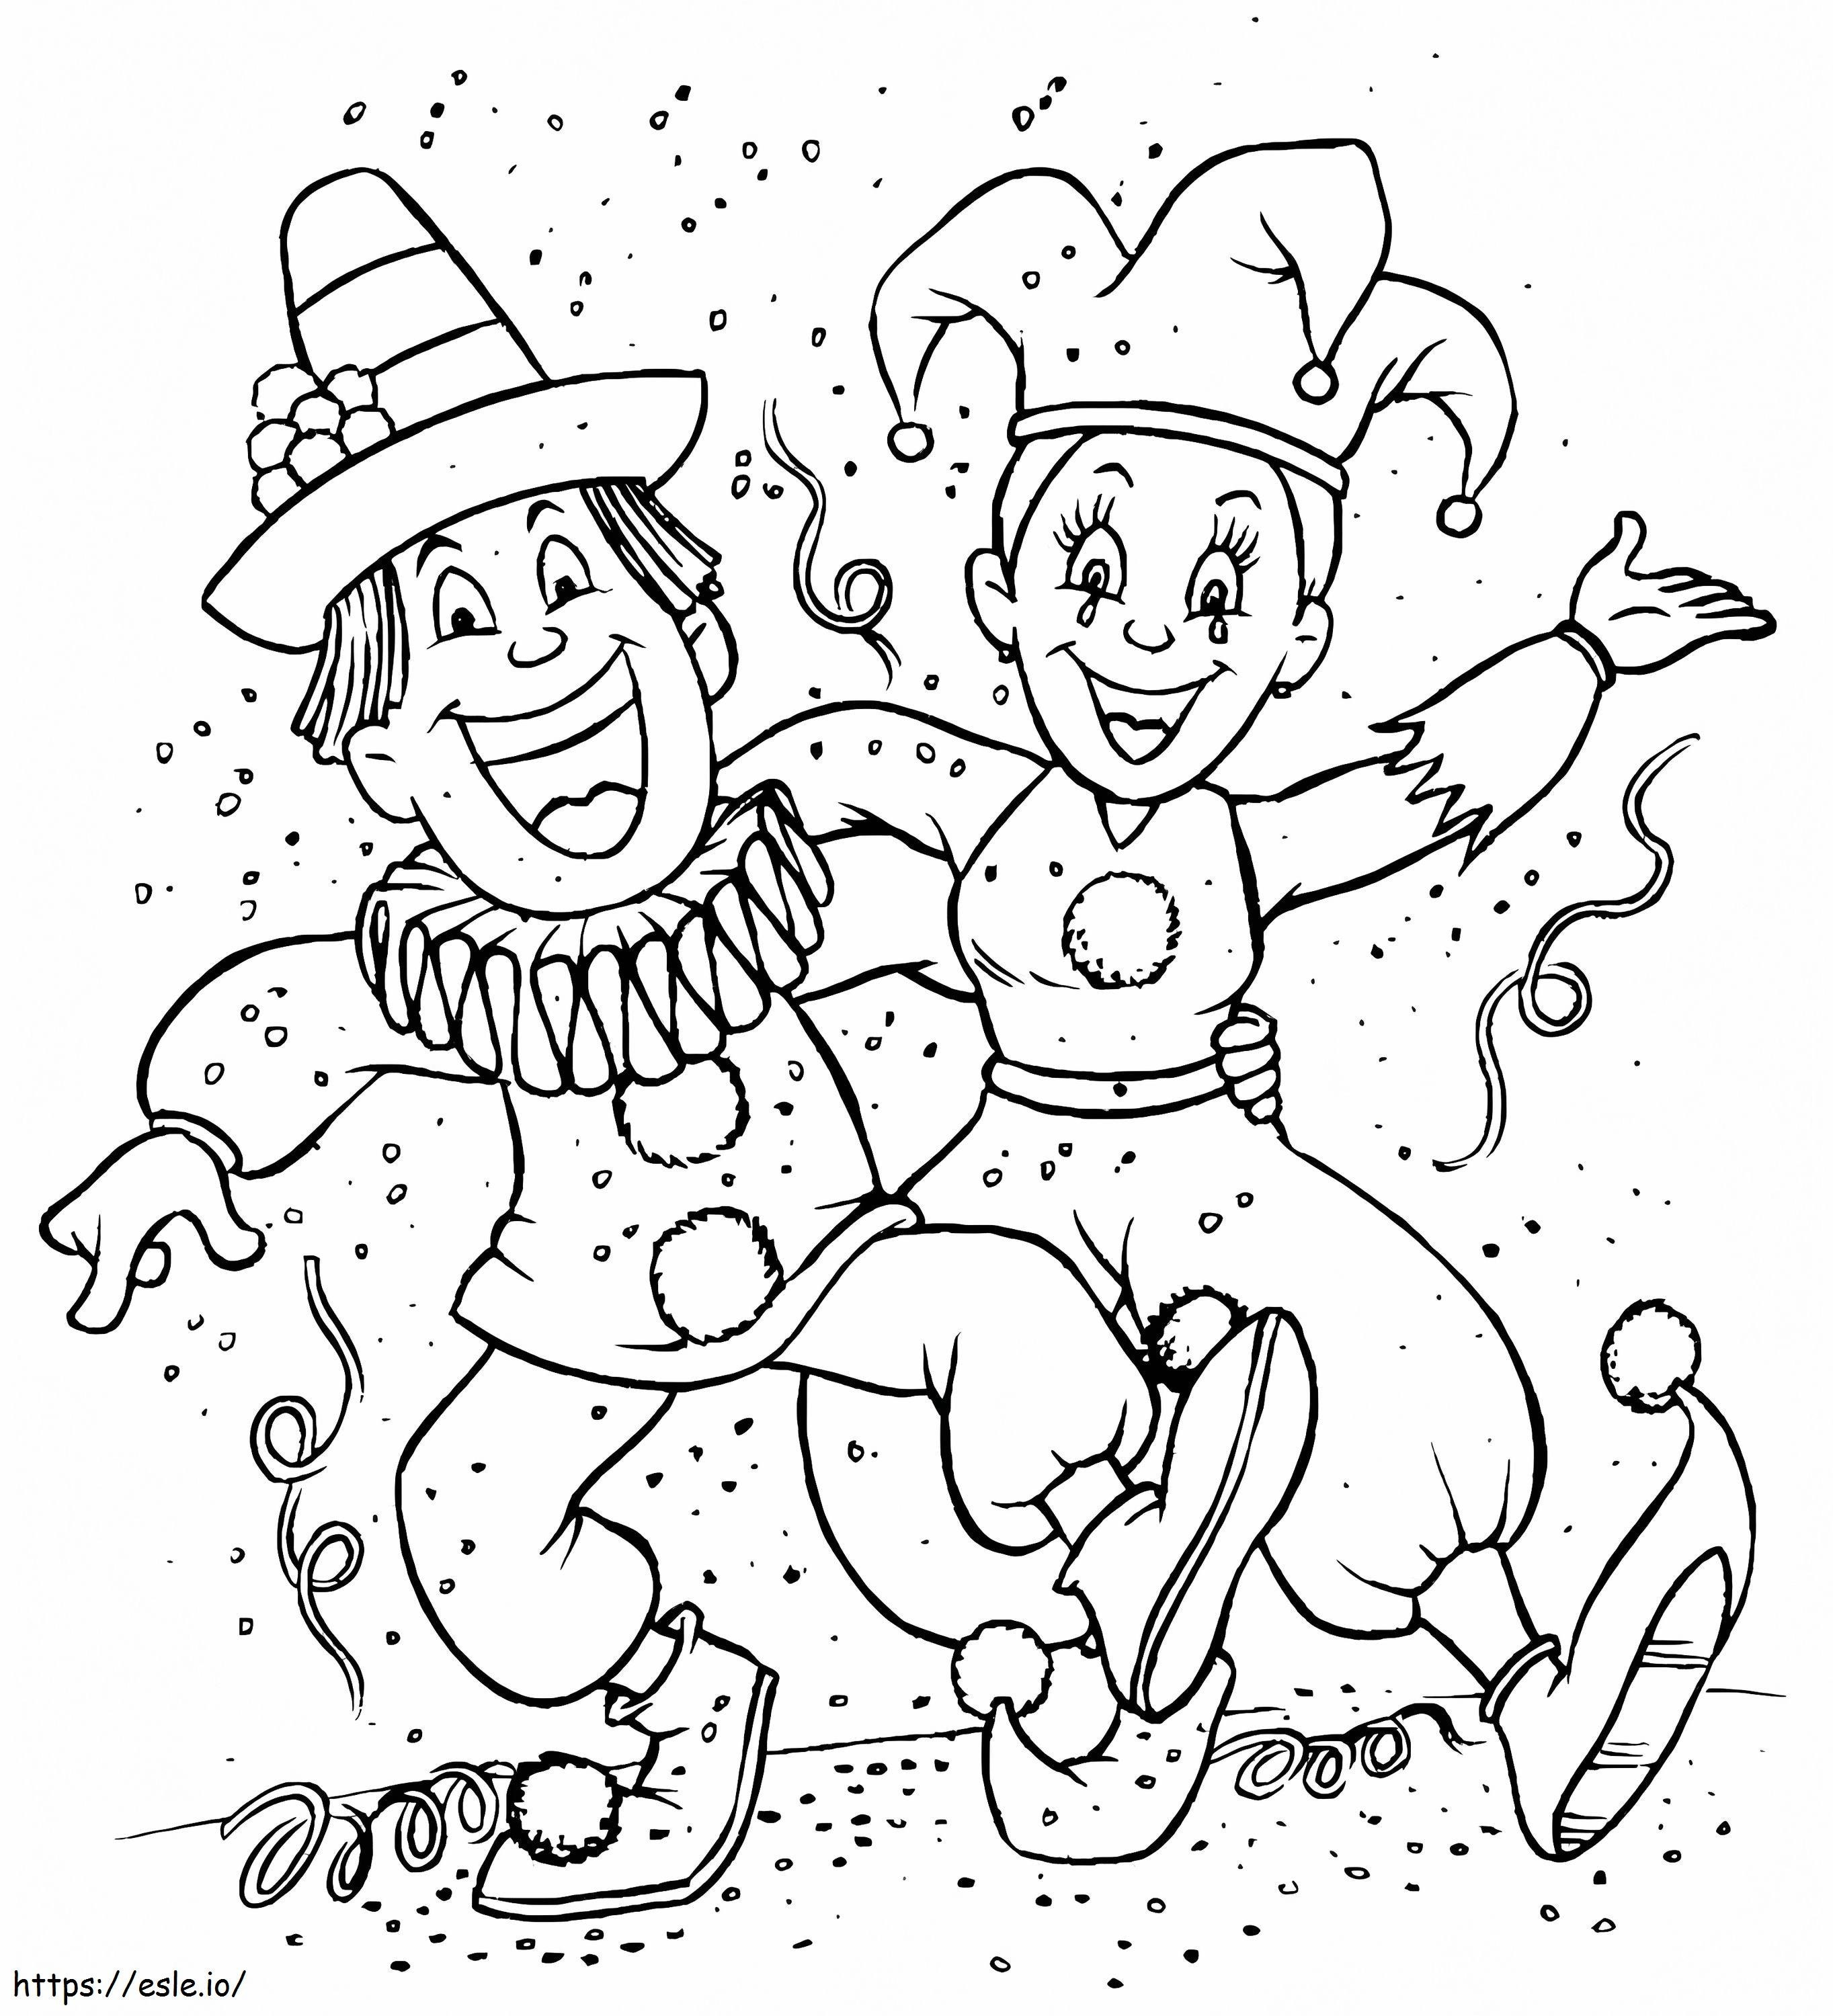 Carnival 4 coloring page